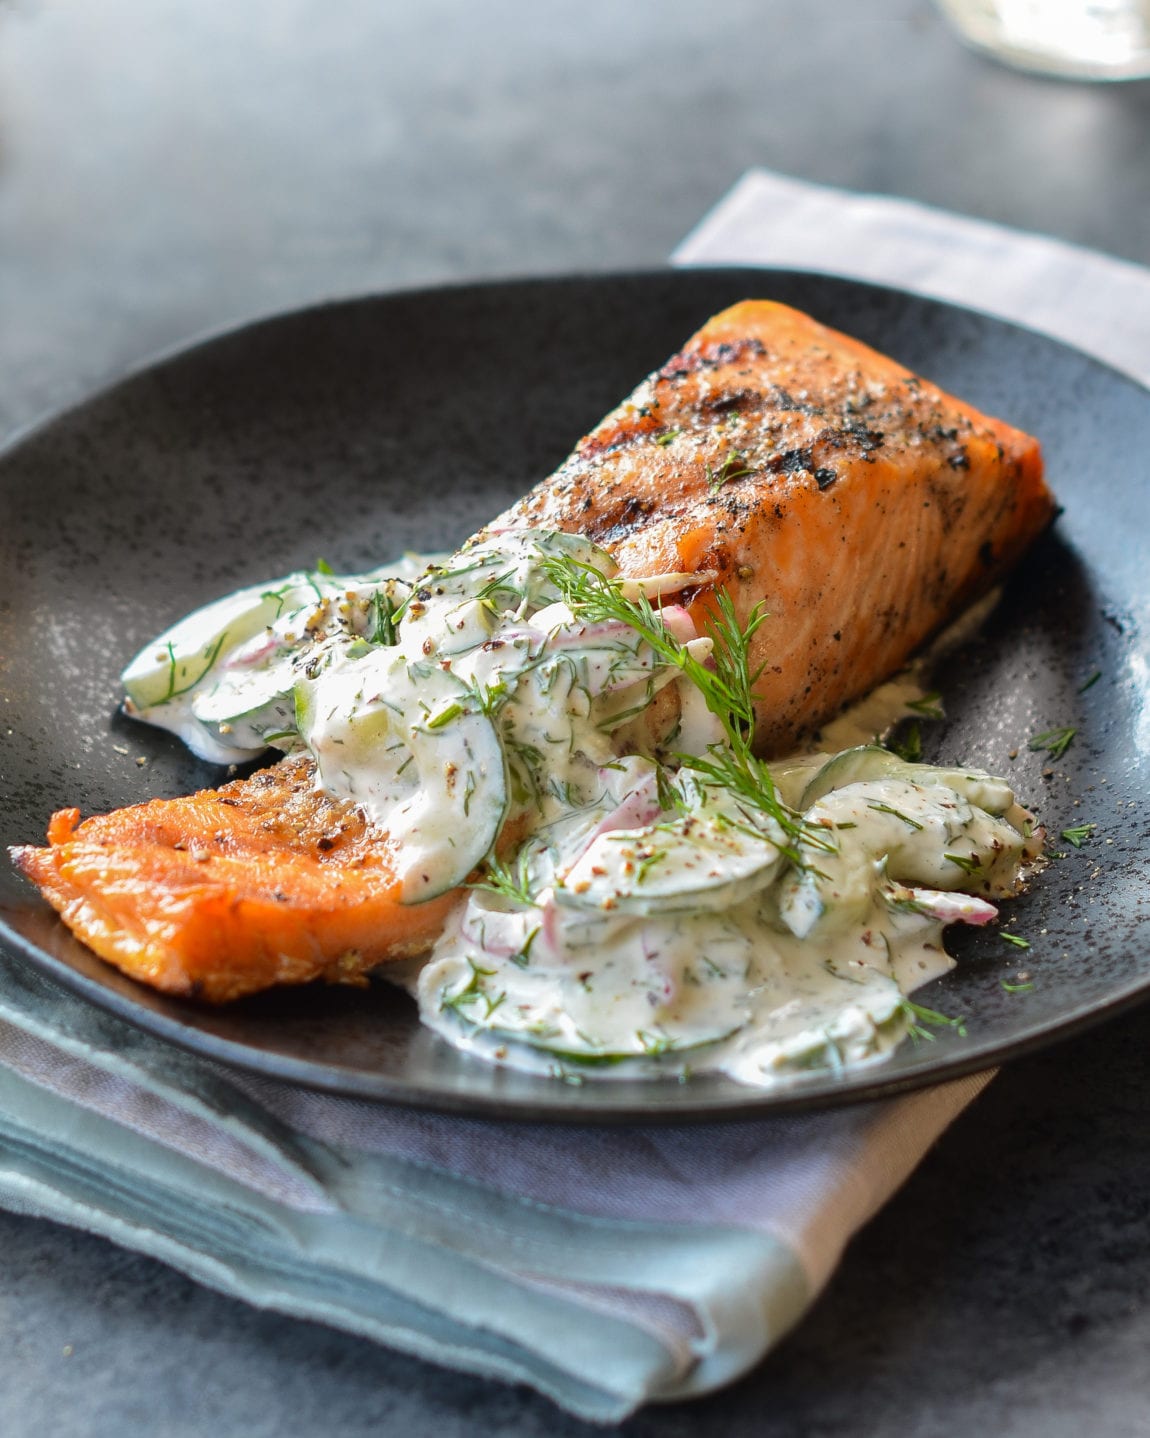 Grilling Recipes Salmon: The Perfect Summer BBQ Dish